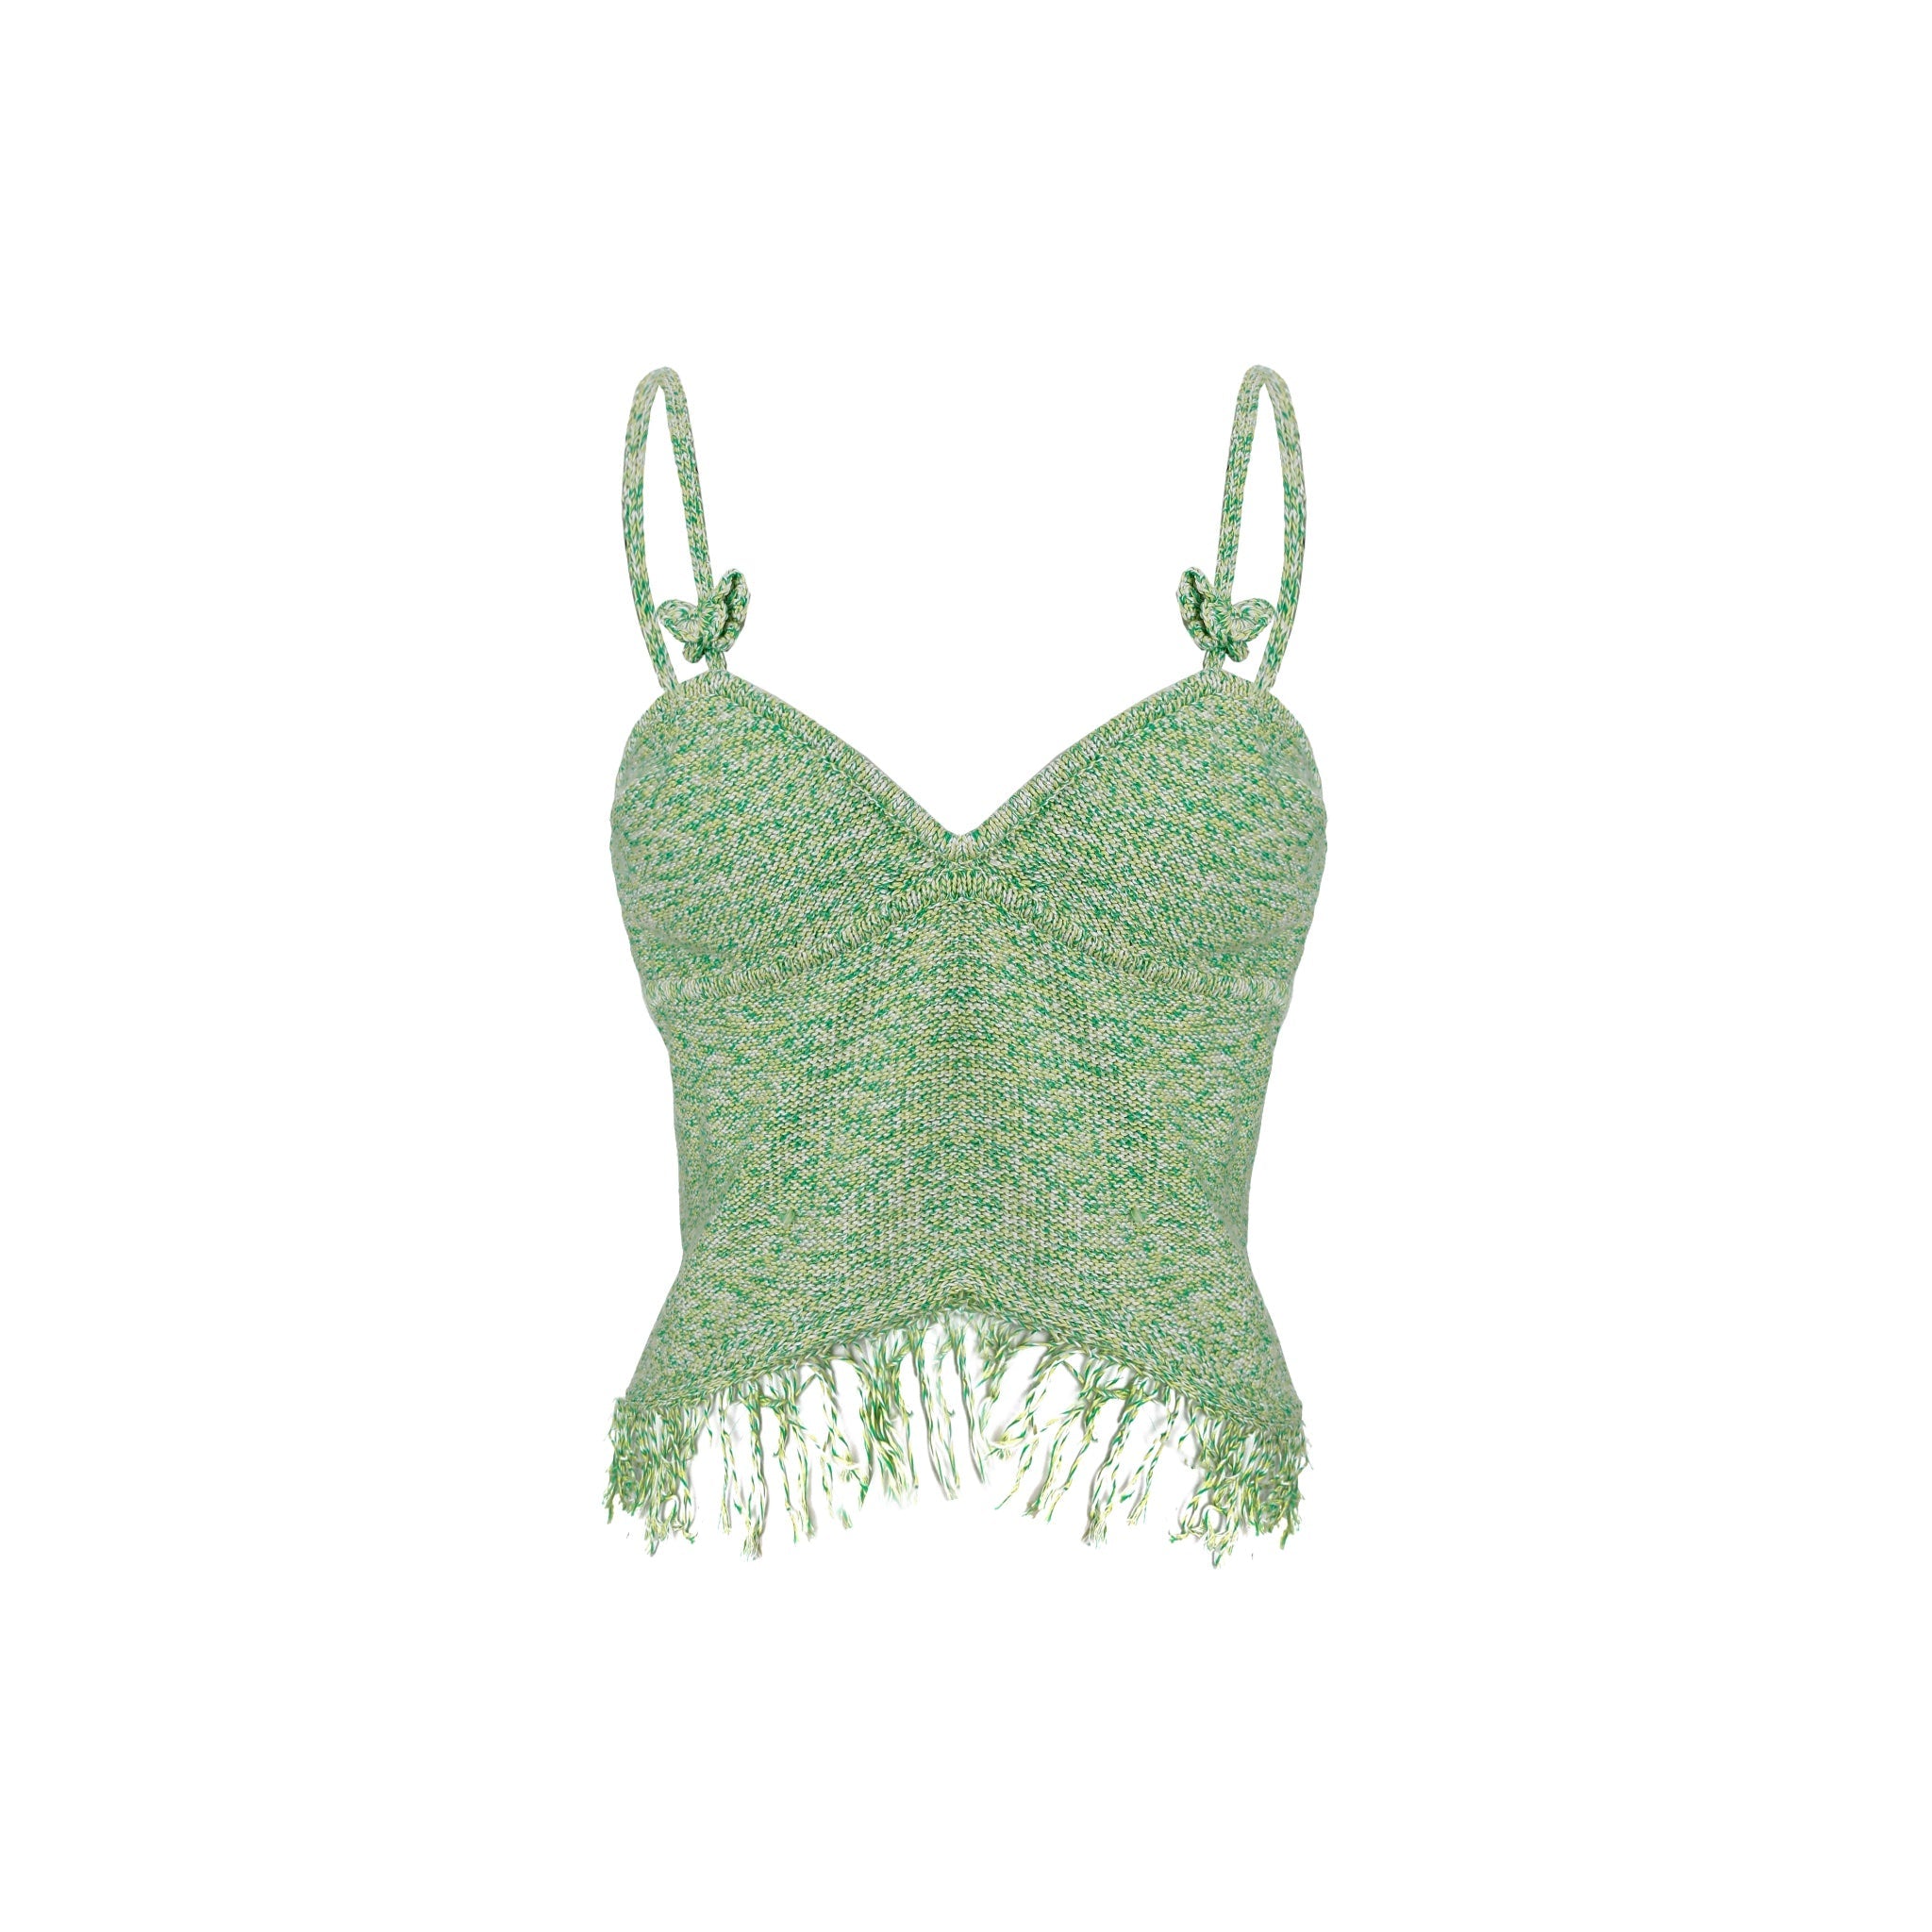 KNIT CLUB 1990™ KAI Green Floral Camisole Top | MADA IN CHINA